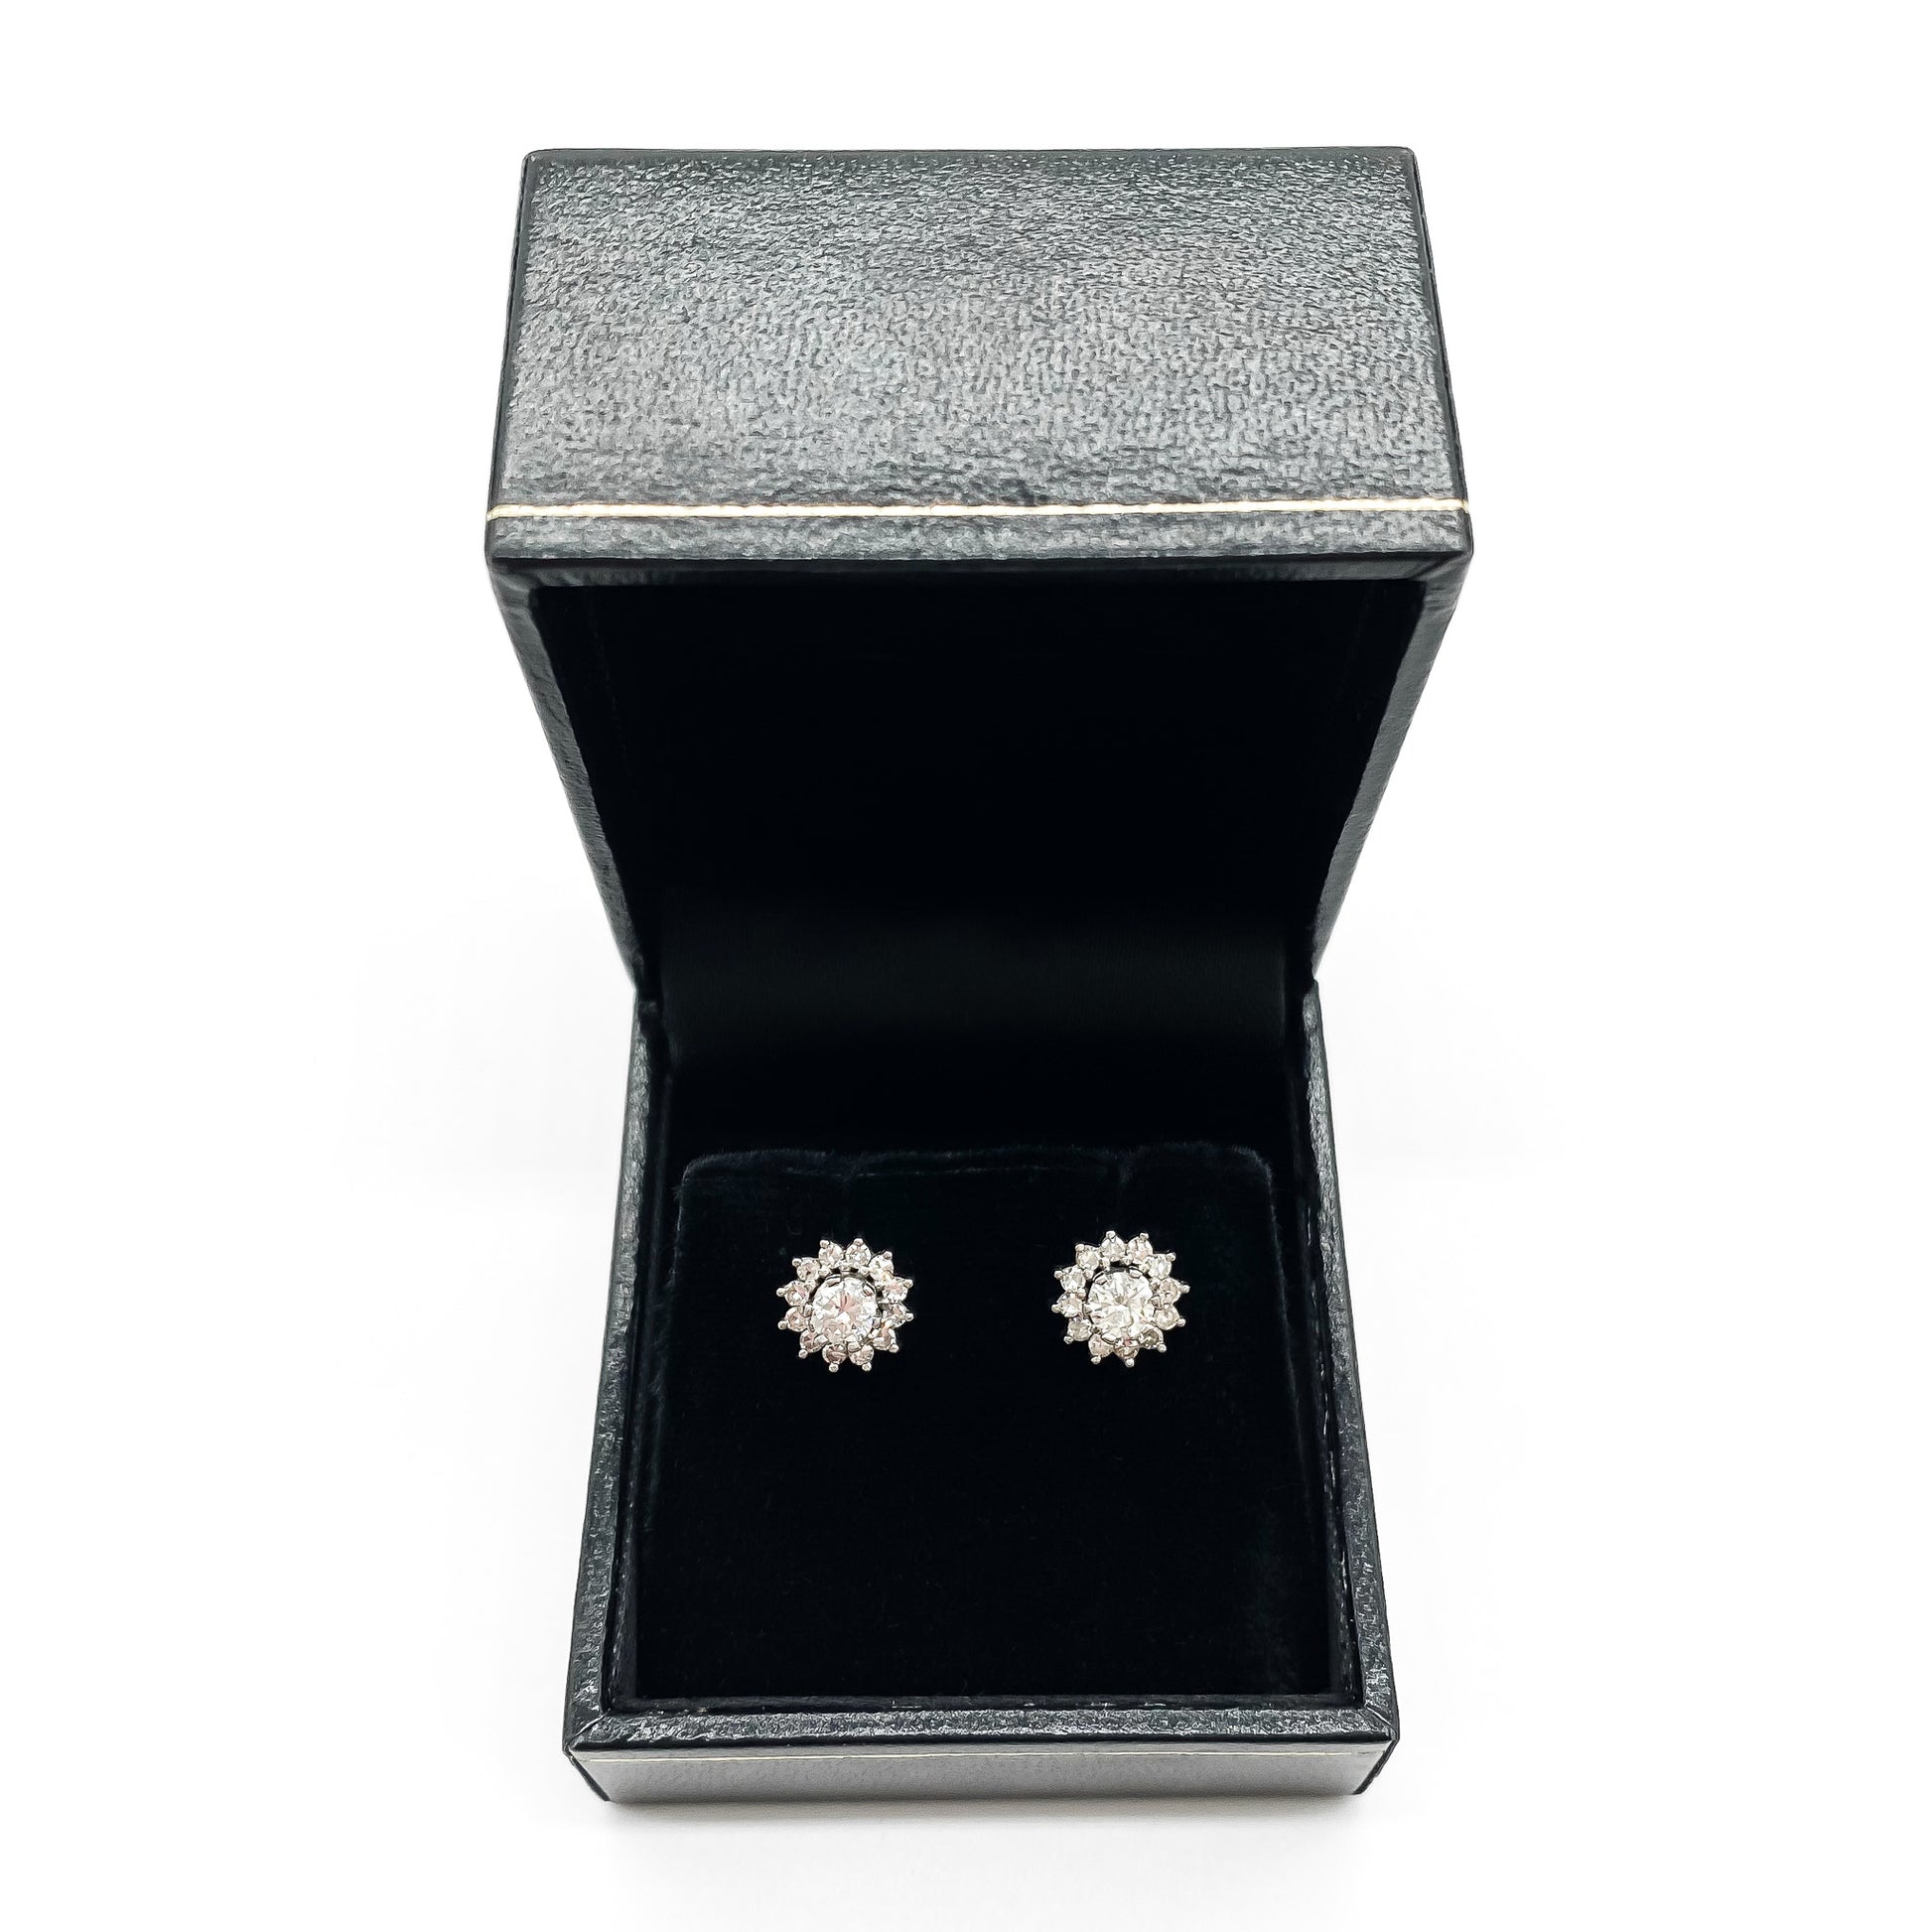 Stylish vintage 18ct white gold flower stud earrings with diamonds in a tier setting.